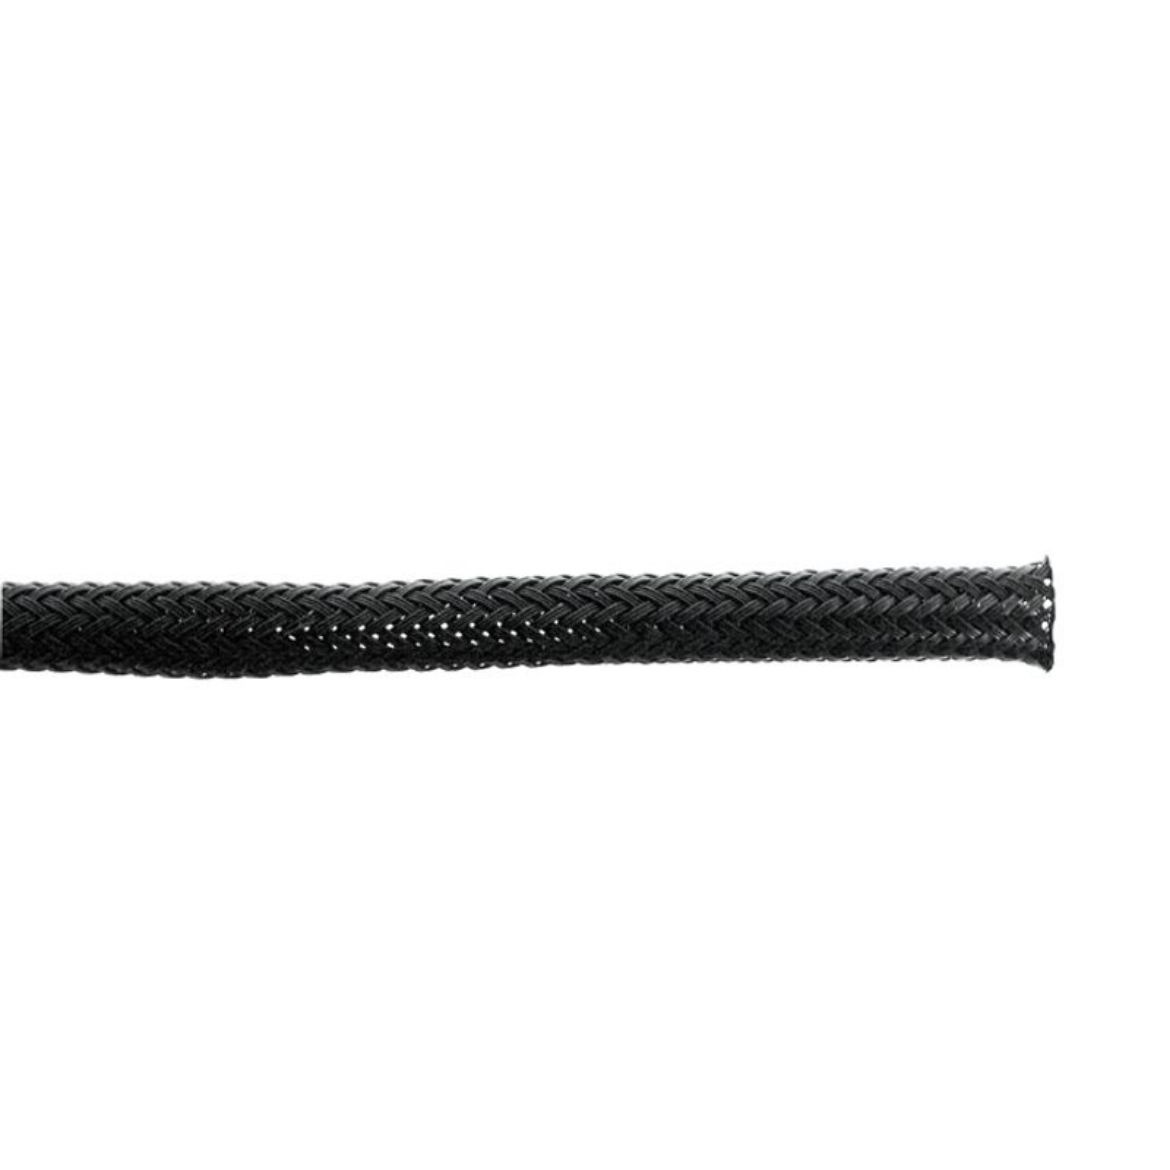 Picture of LV AUTOMOTIVE BRAIDED EXPANDABLE SLEEVING 9MM BLACK - 100M ROLL